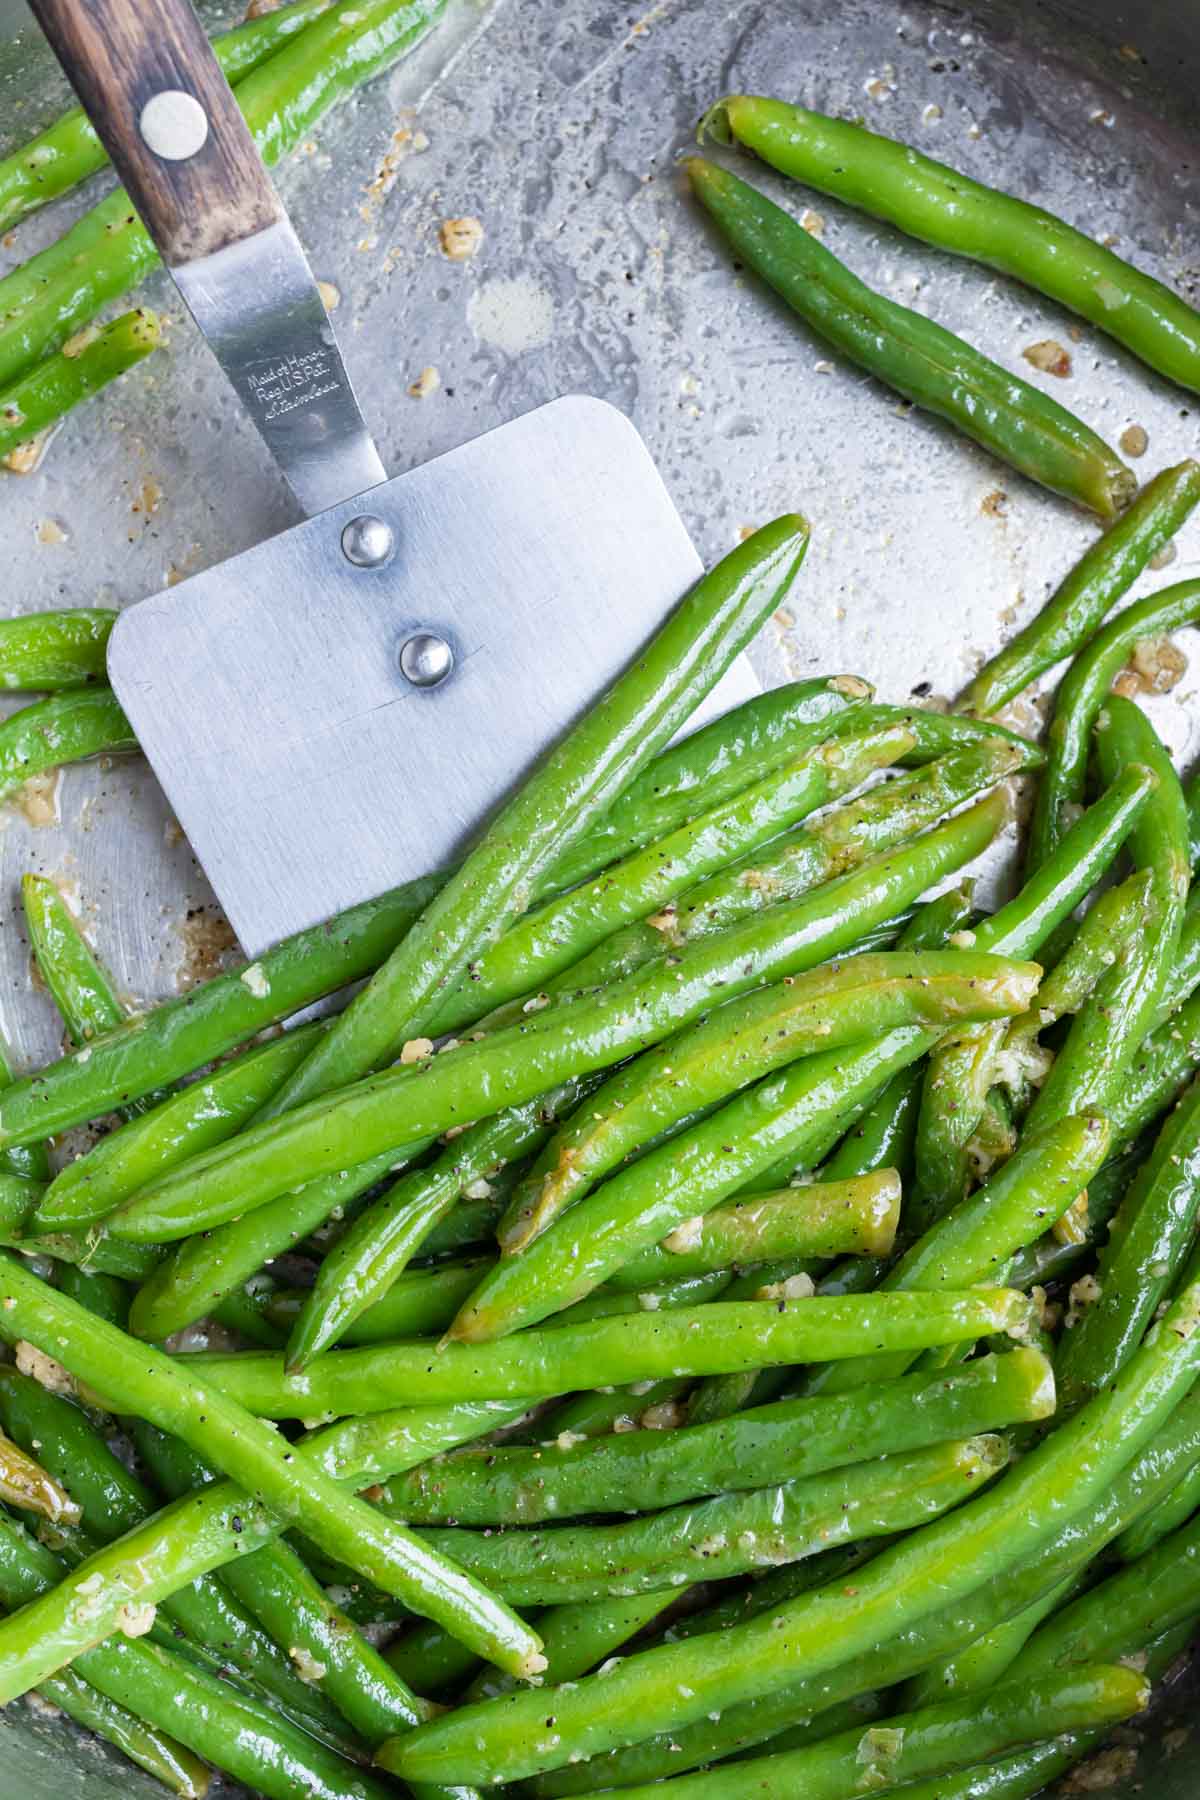 A spatula is used to remove the green beans from the skillet.